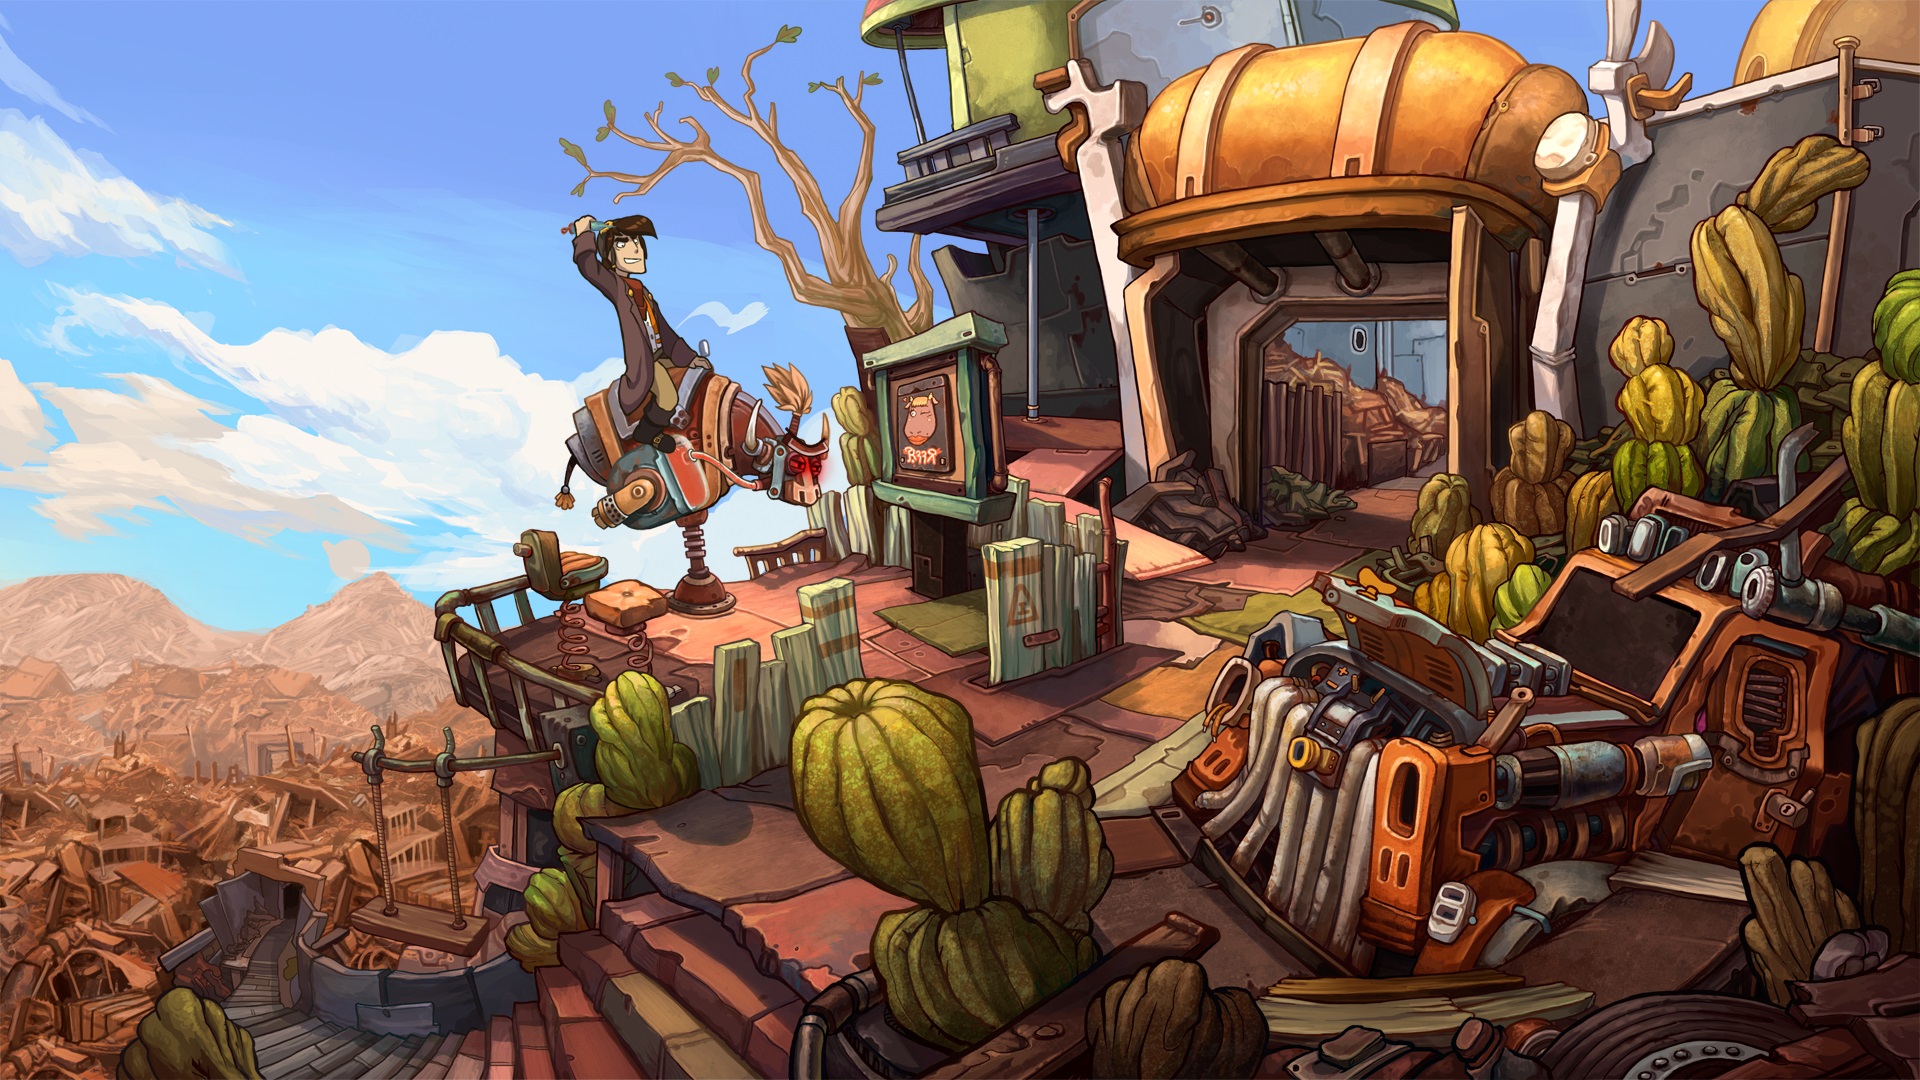 Deponia screenshot from Steam